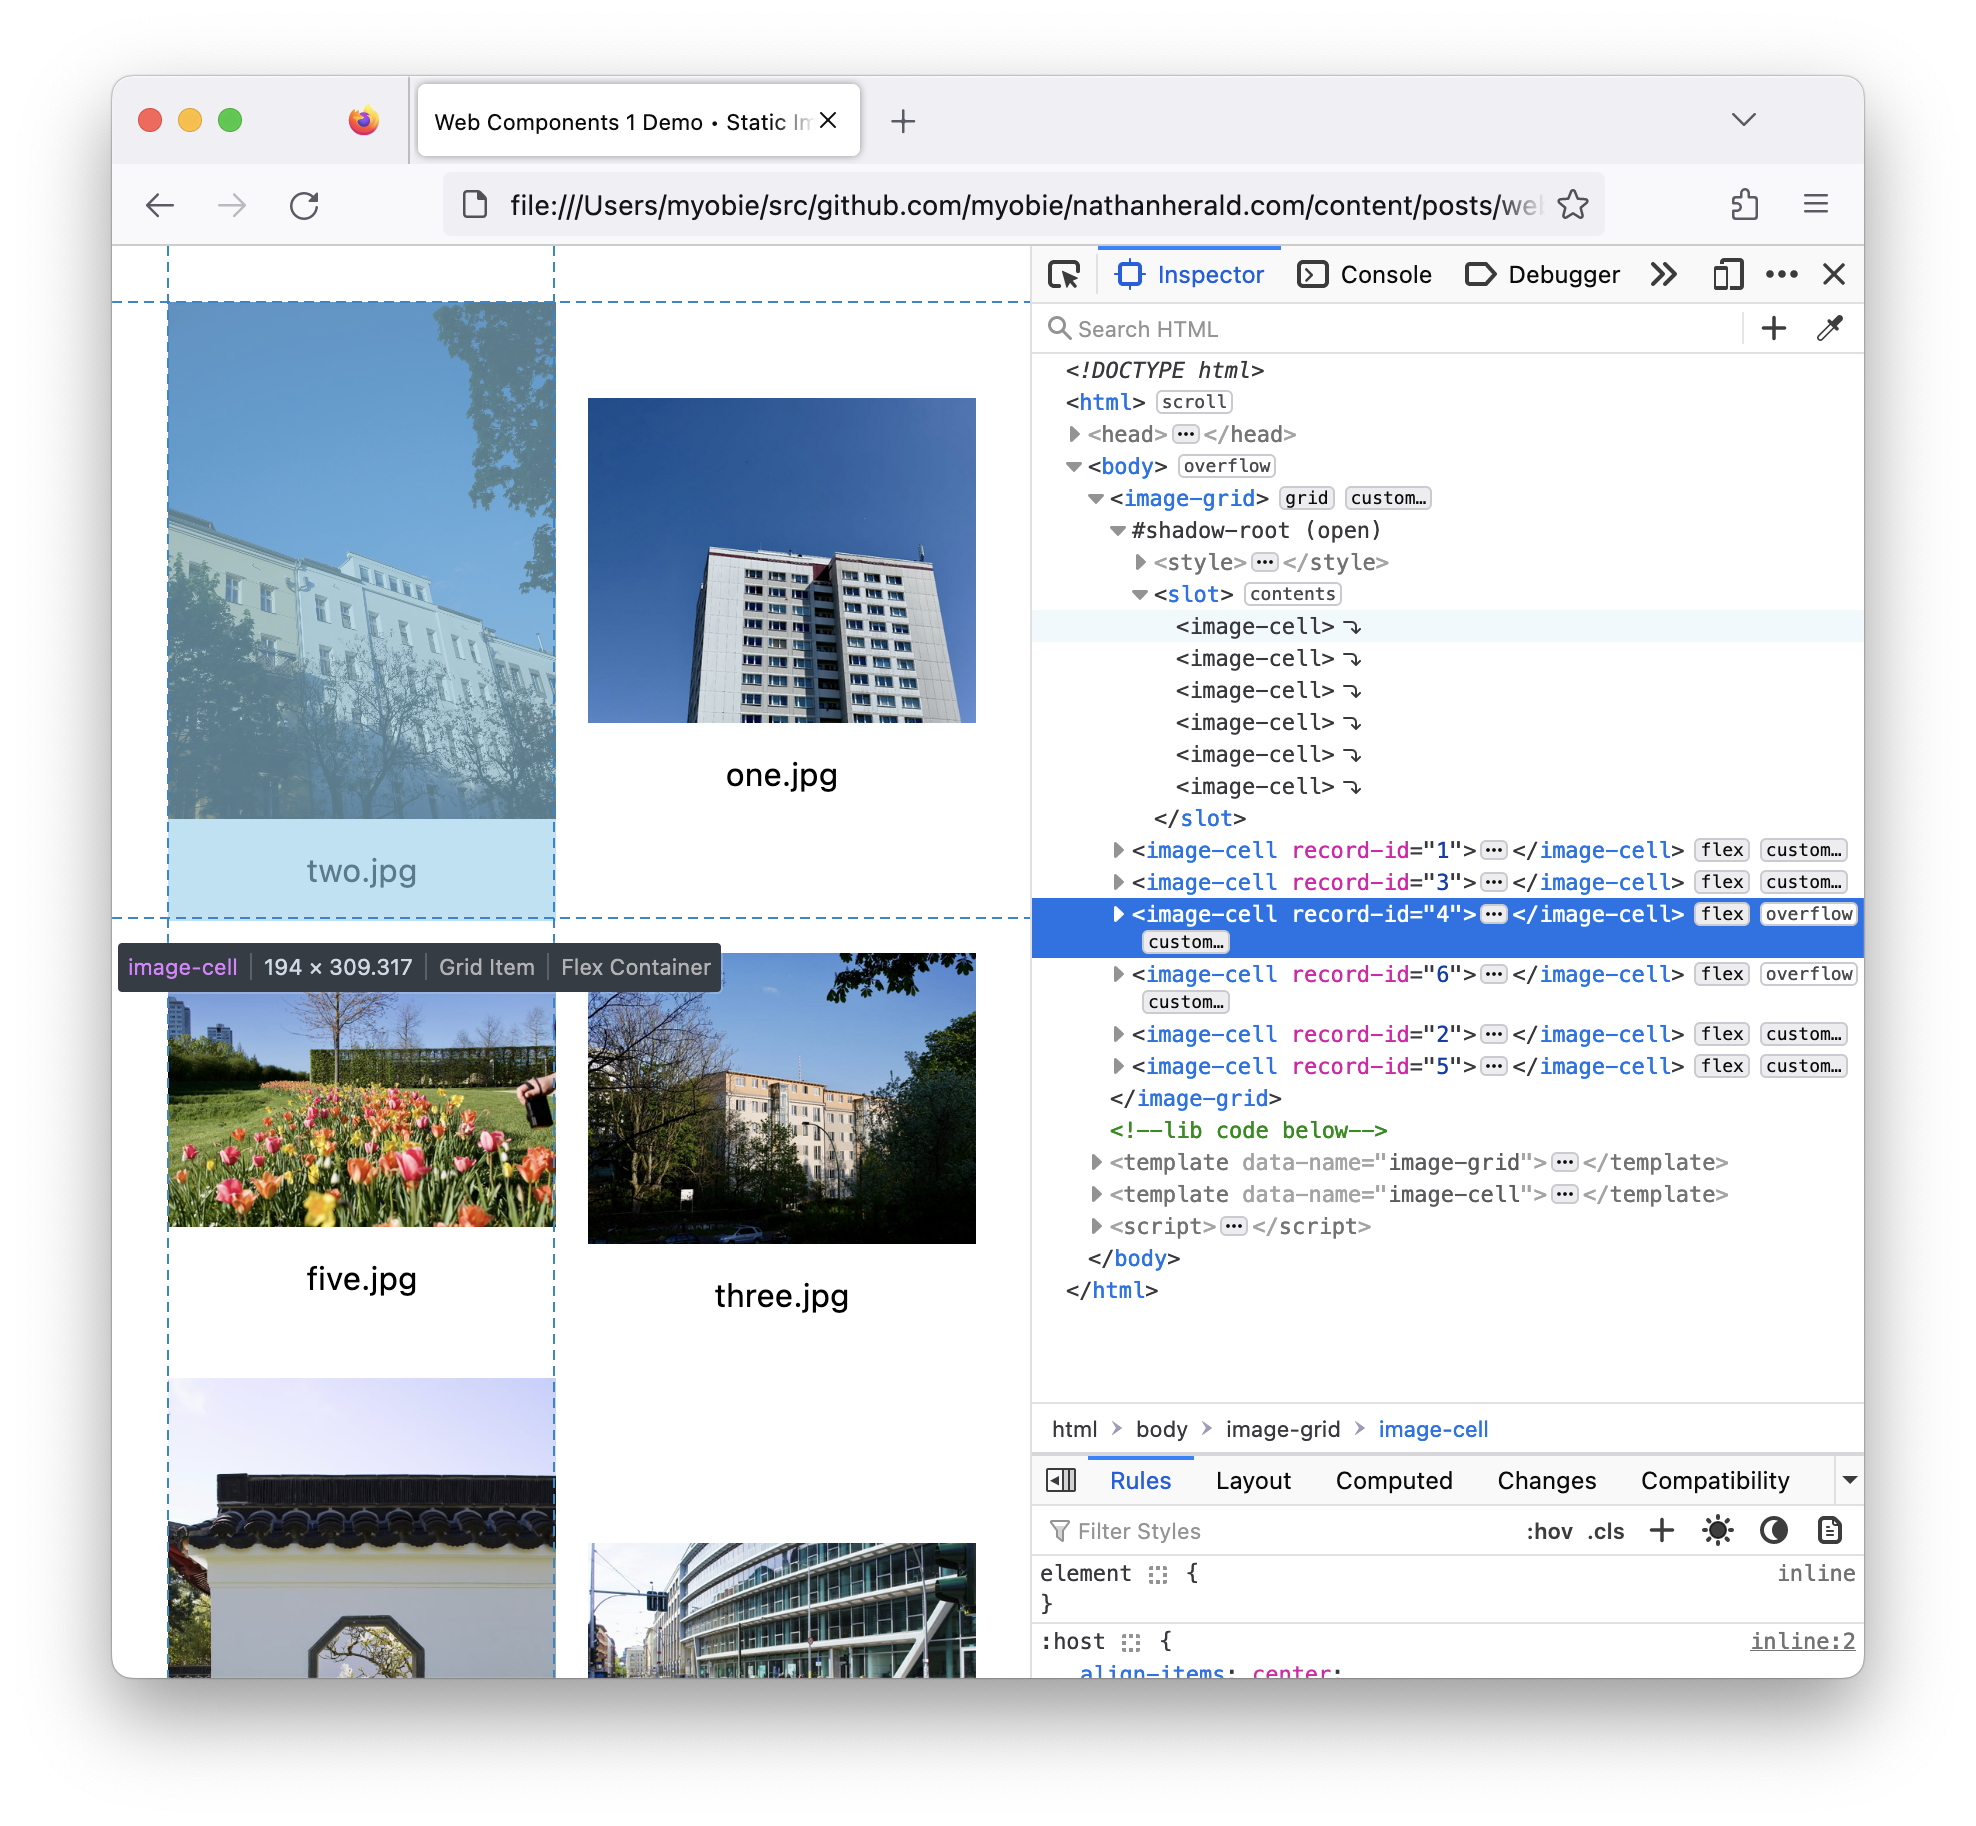 Screenshot of Firefox showing the DOM setup with the image-grid, it’s shadow-root with a slot filled with references to image-cells